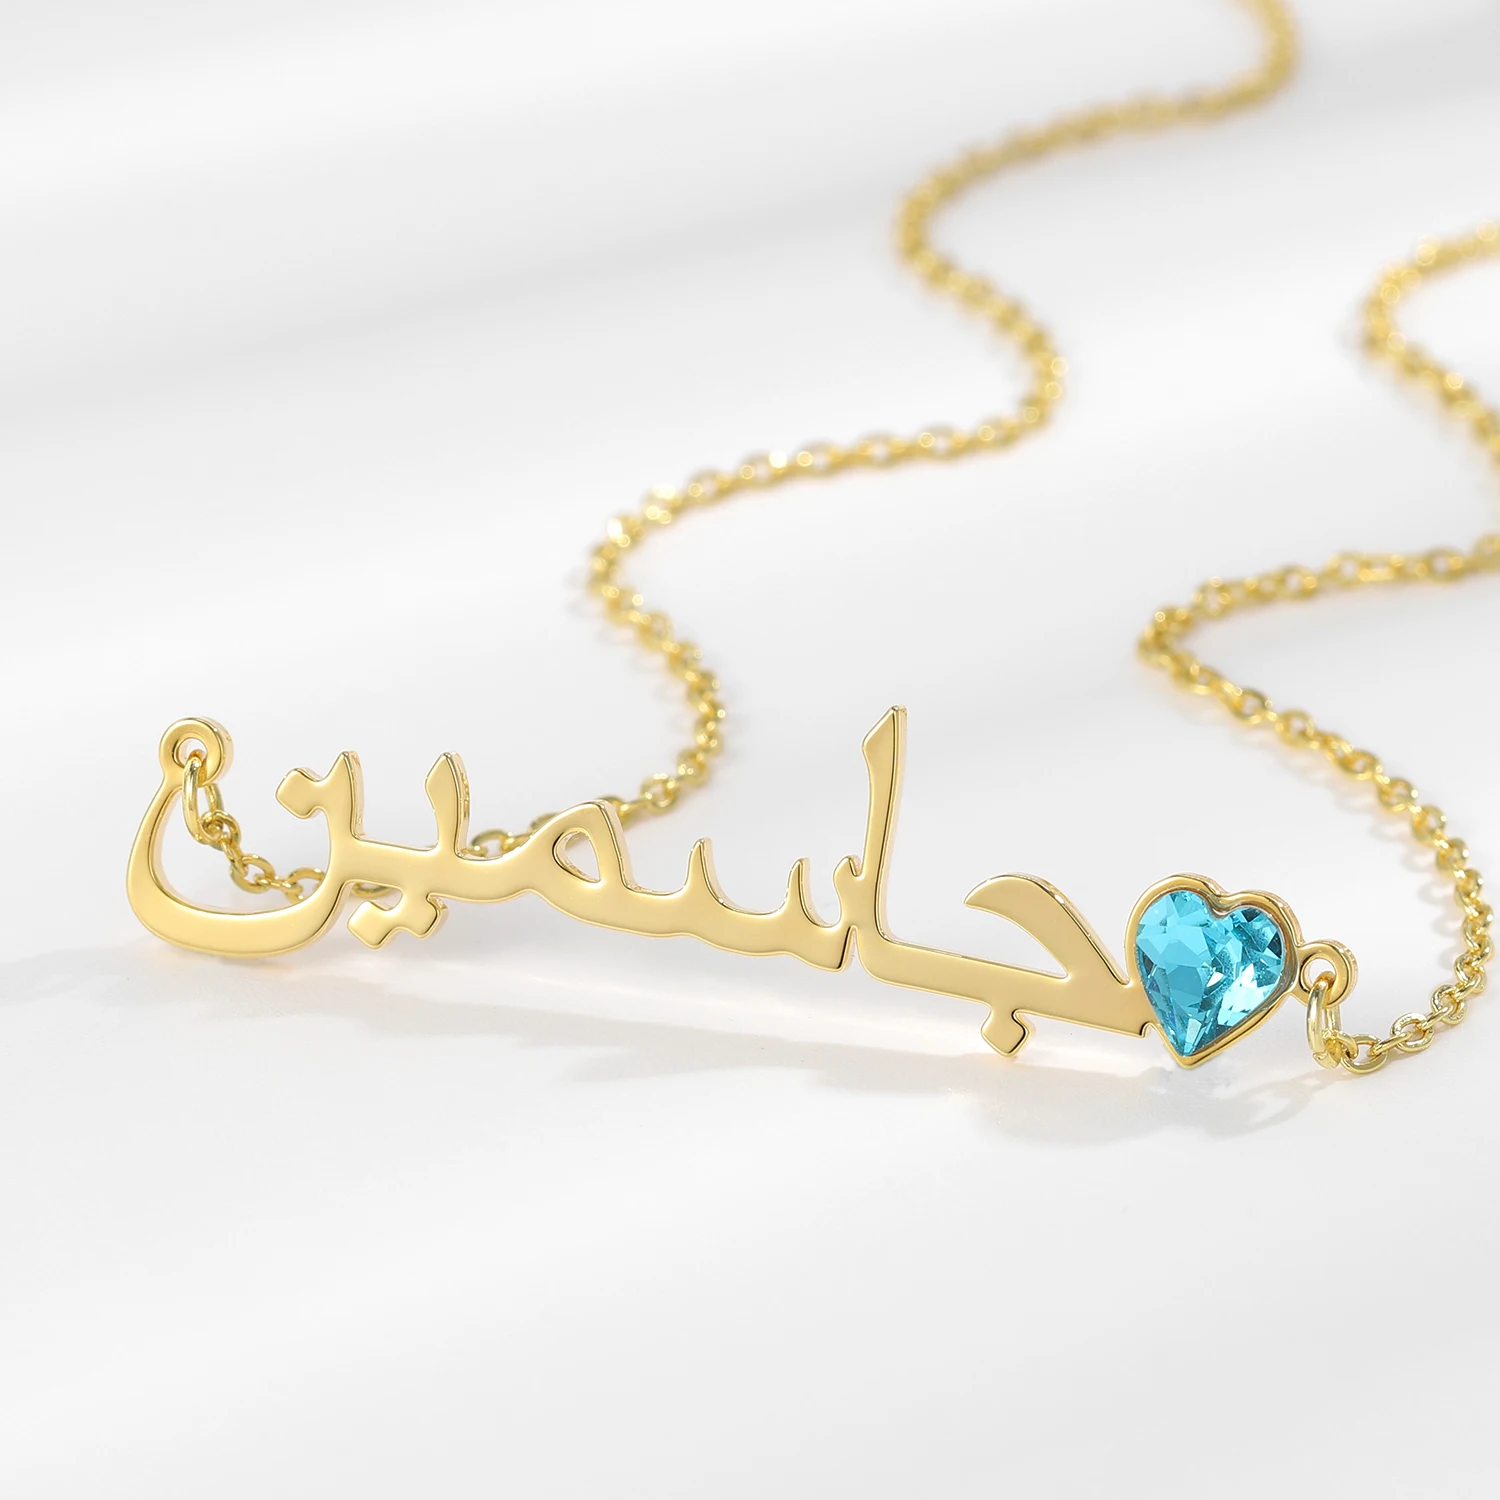 Personalized Arabic Necklace Font  Stainless Steel Nameplate Birthstone Pendant For Women Birthday Jewelry gifts